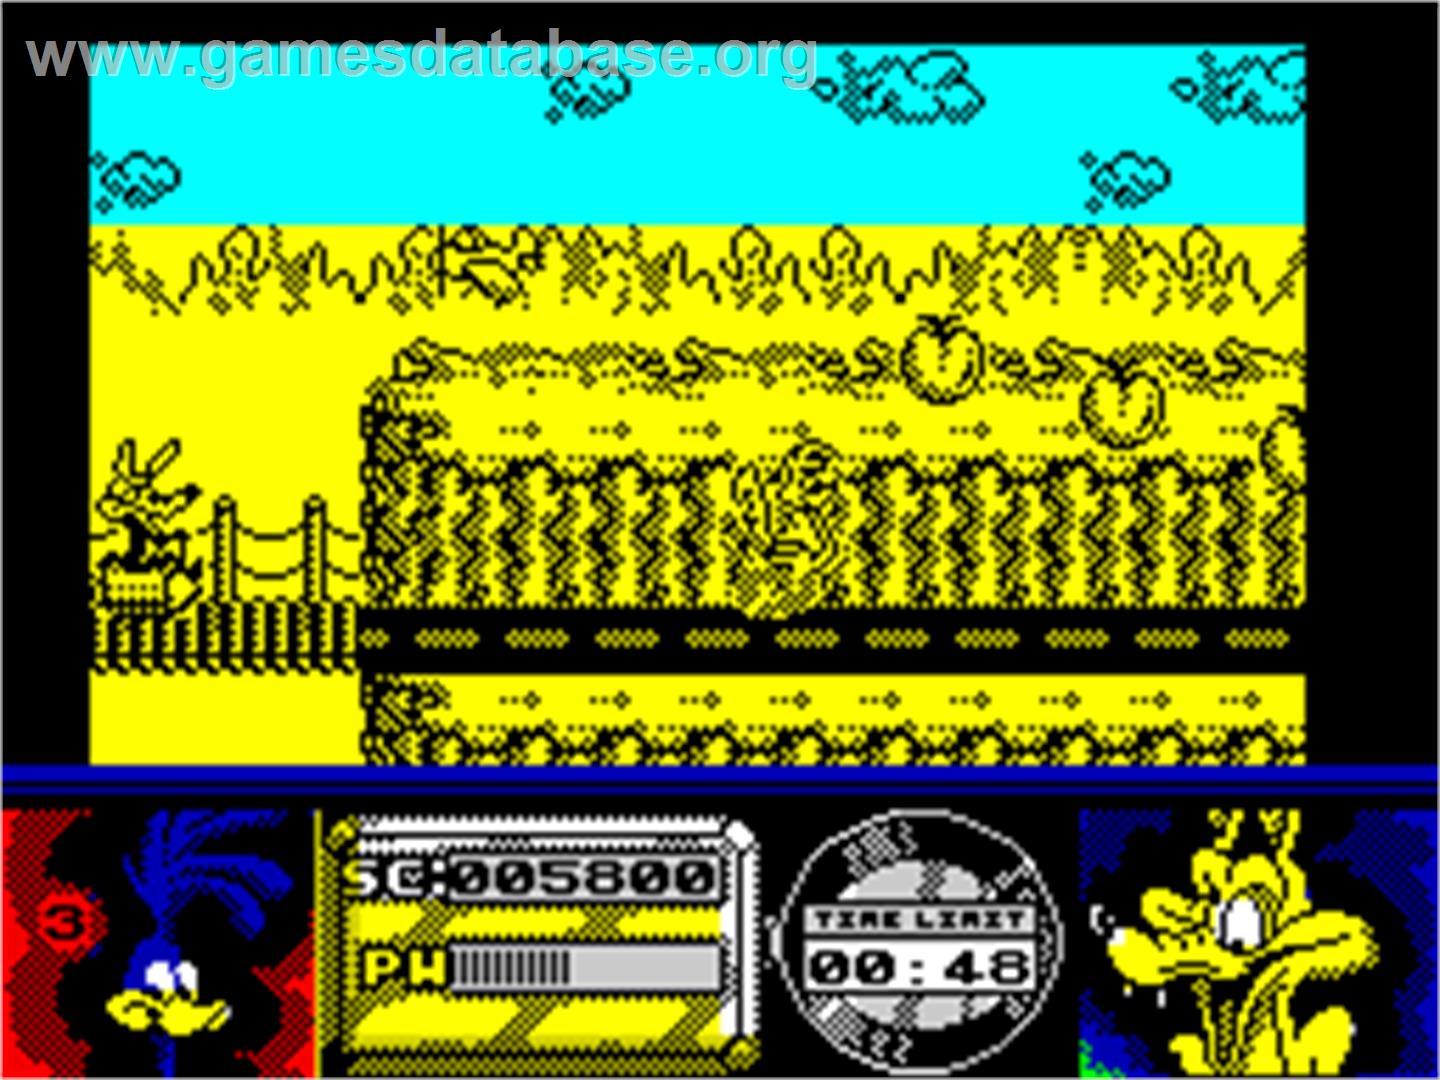 Road Runner and Wile E. Coyote - Sinclair ZX Spectrum - Artwork - In Game